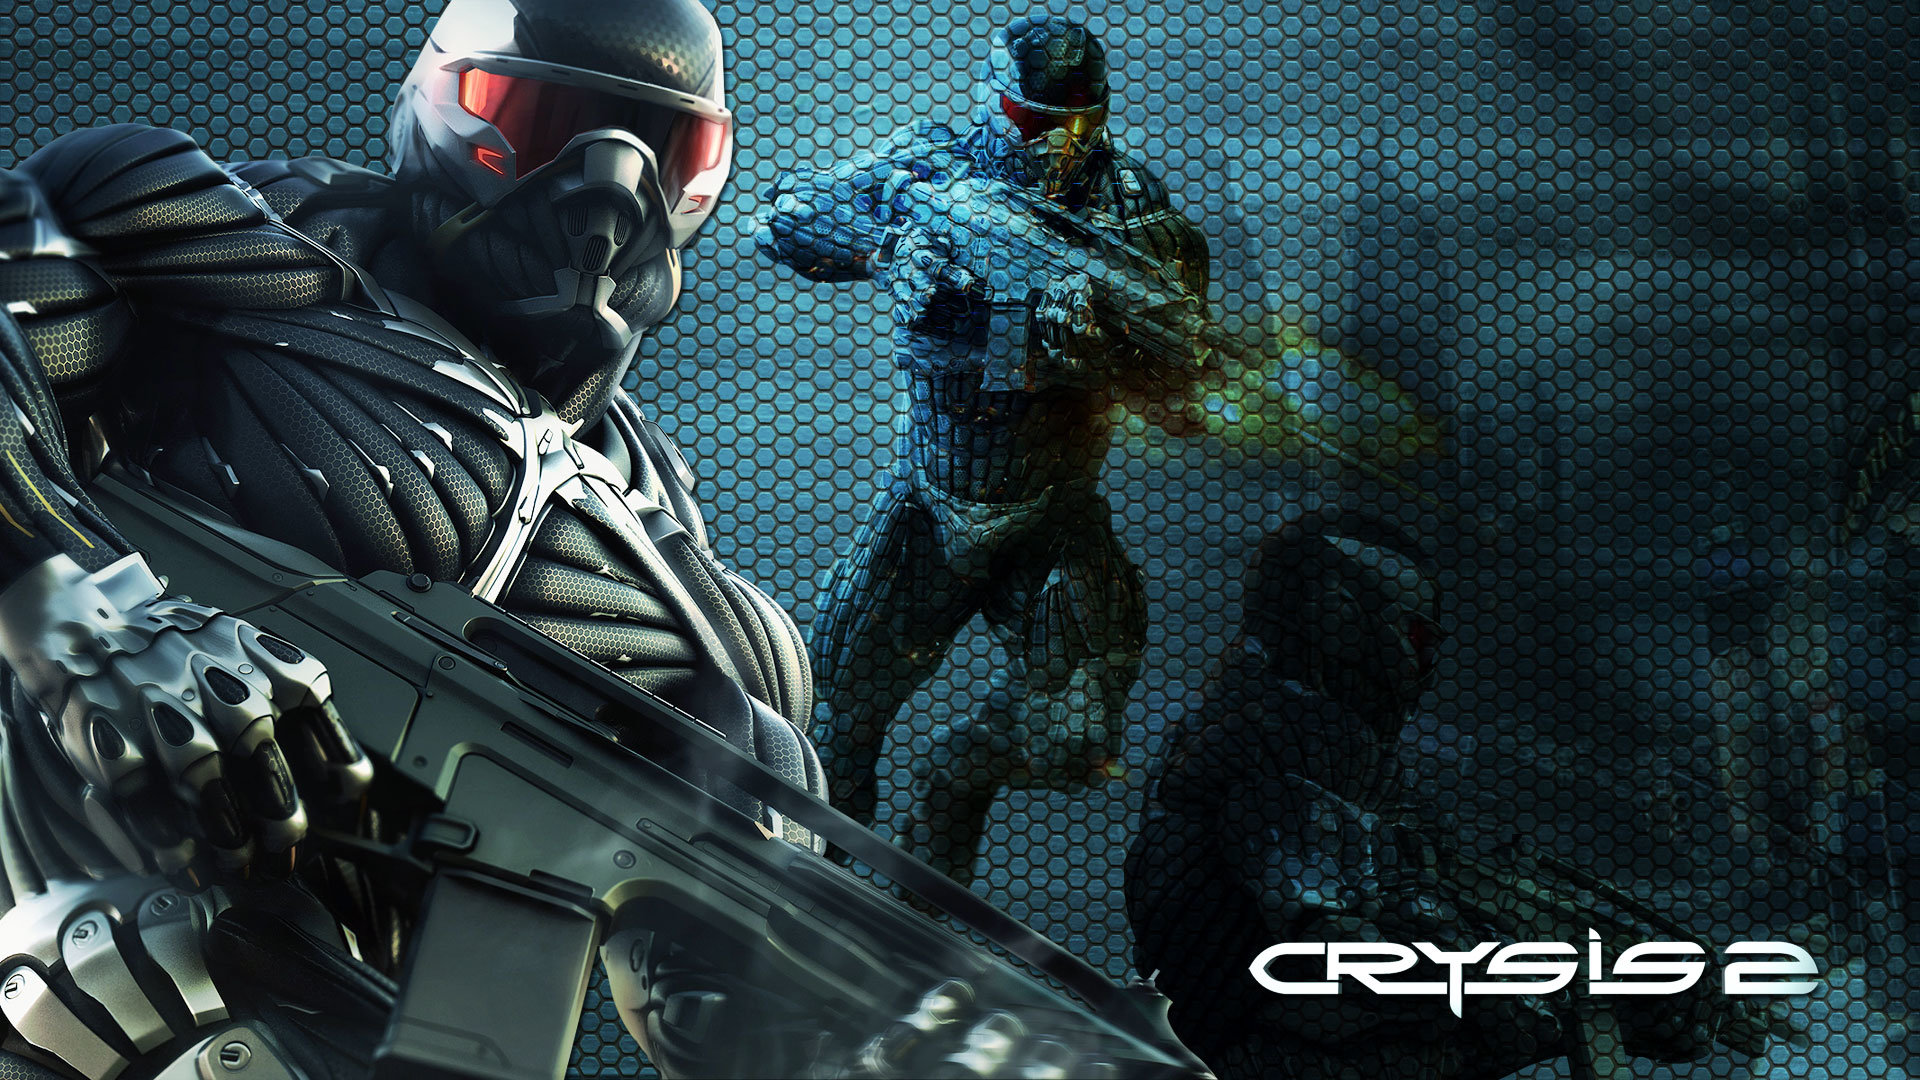 Download full hd 1920x1080 Crysis 2 PC wallpaper ID:379744 for free